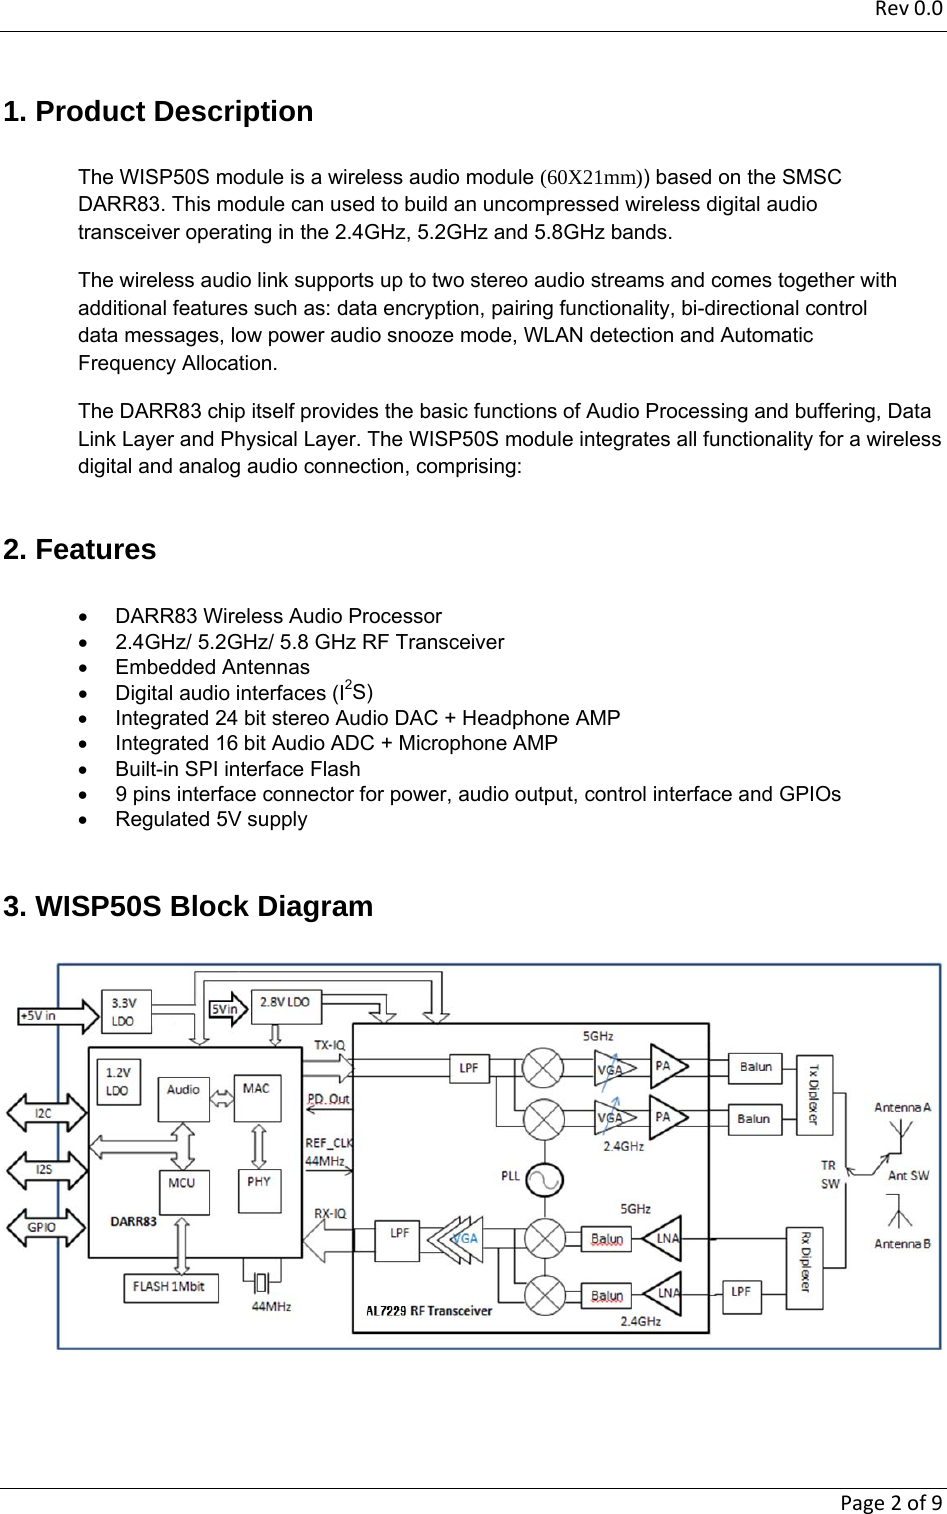 Rev0.0   Page2of91. Product Description The WISP50S module is a wireless audio module (60X21mm)) based on the SMSC DARR83. This module can used to build an uncompressed wireless digital audio transceiver operating in the 2.4GHz, 5.2GHz and 5.8GHz bands. The wireless audio link supports up to two stereo audio streams and comes together with additional features such as: data encryption, pairing functionality, bi-directional control data messages, low power audio snooze mode, WLAN detection and Automatic Frequency Allocation.  The DARR83 chip itself provides the basic functions of Audio Processing and buffering, Data Link Layer and Physical Layer. The WISP50S module integrates all functionality for a wireless digital and analog audio connection, comprising:  2. Features   DARR83 Wireless Audio Processor    2.4GHz/ 5.2GHz/ 5.8 GHz RF Transceiver  Embedded Antennas    Digital audio interfaces (I2S)   Integrated 24 bit stereo Audio DAC + Headphone AMP   Integrated 16 bit Audio ADC + Microphone AMP   Built-in SPI interface Flash     9 pins interface connector for power, audio output, control interface and GPIOs   Regulated 5V supply   3. WISP50S Block Diagram    